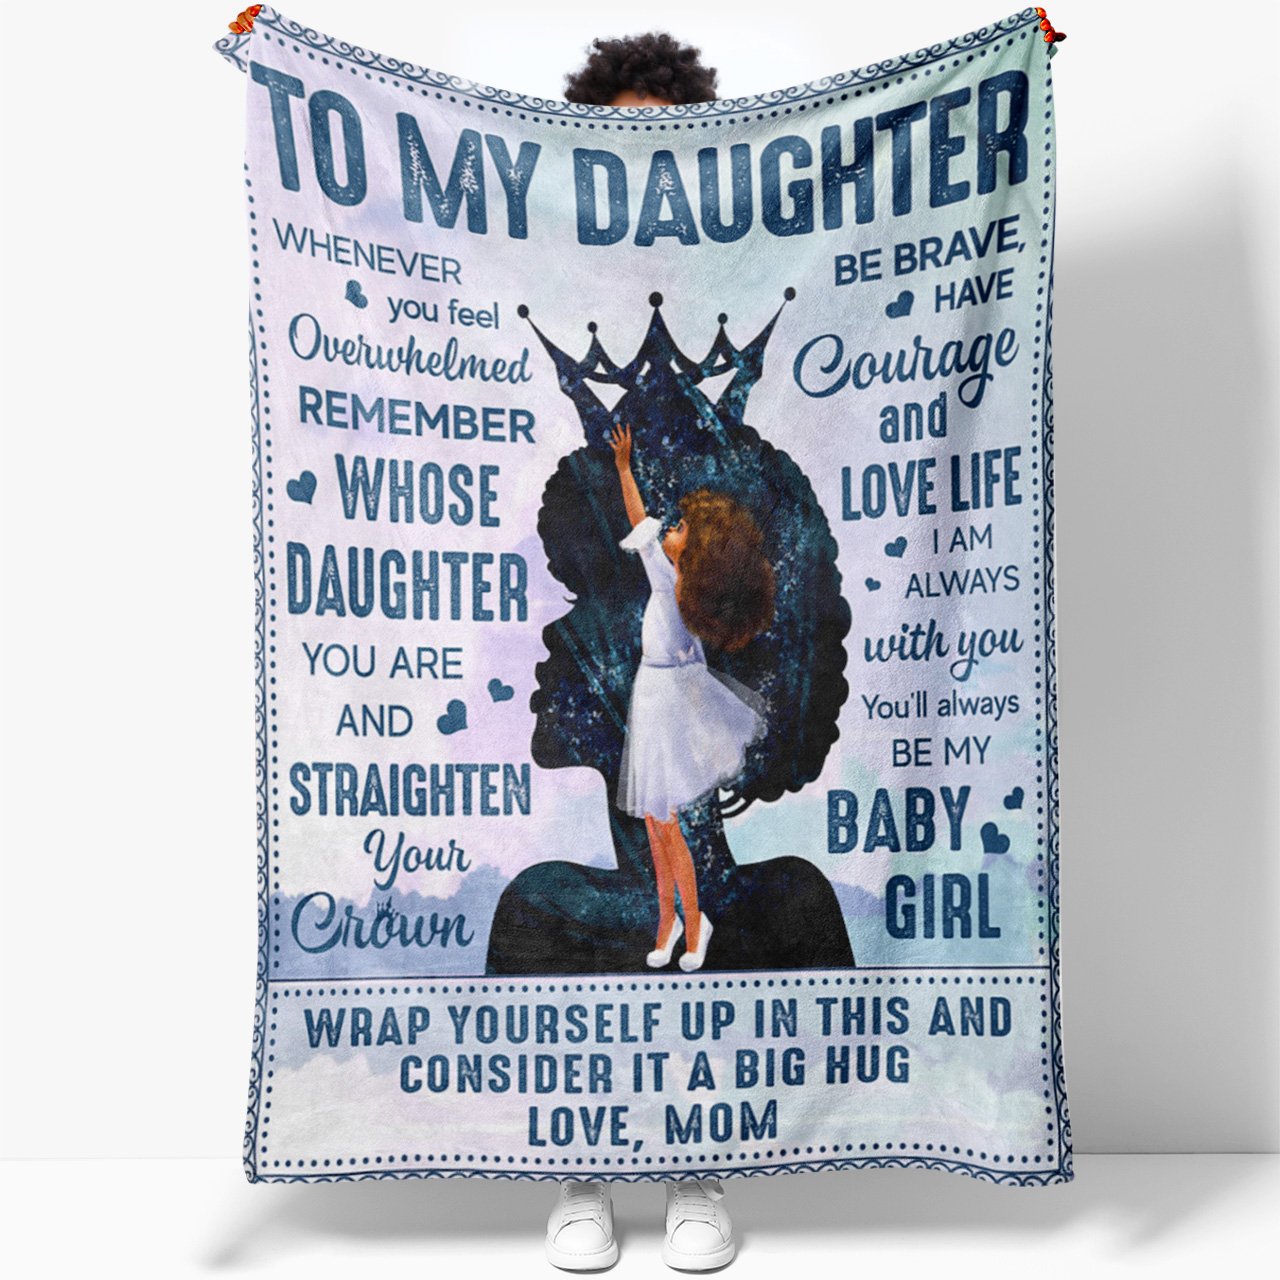 Whenever You Feel Overwhelmed Blanket for Black Daughter, Straighten Your Crown be Brave Blanket for Daughter, Personalized Gifts For Daughter